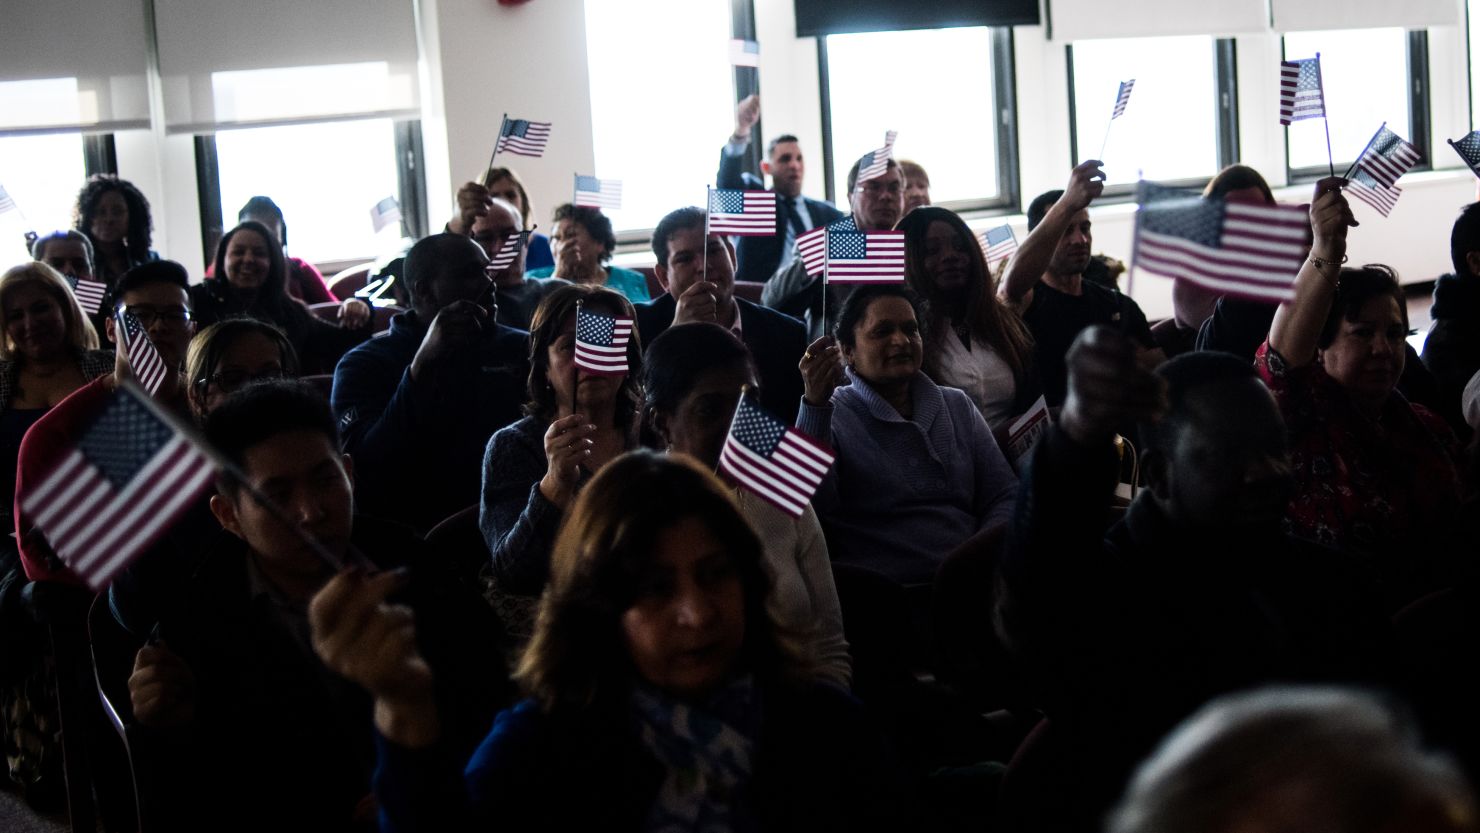 People wave their flags during the playing of "America the Beautiful" at a naturalization ceremony at the USCIS Peter Rodino Federal Building in Newark on Thursday, February 16.